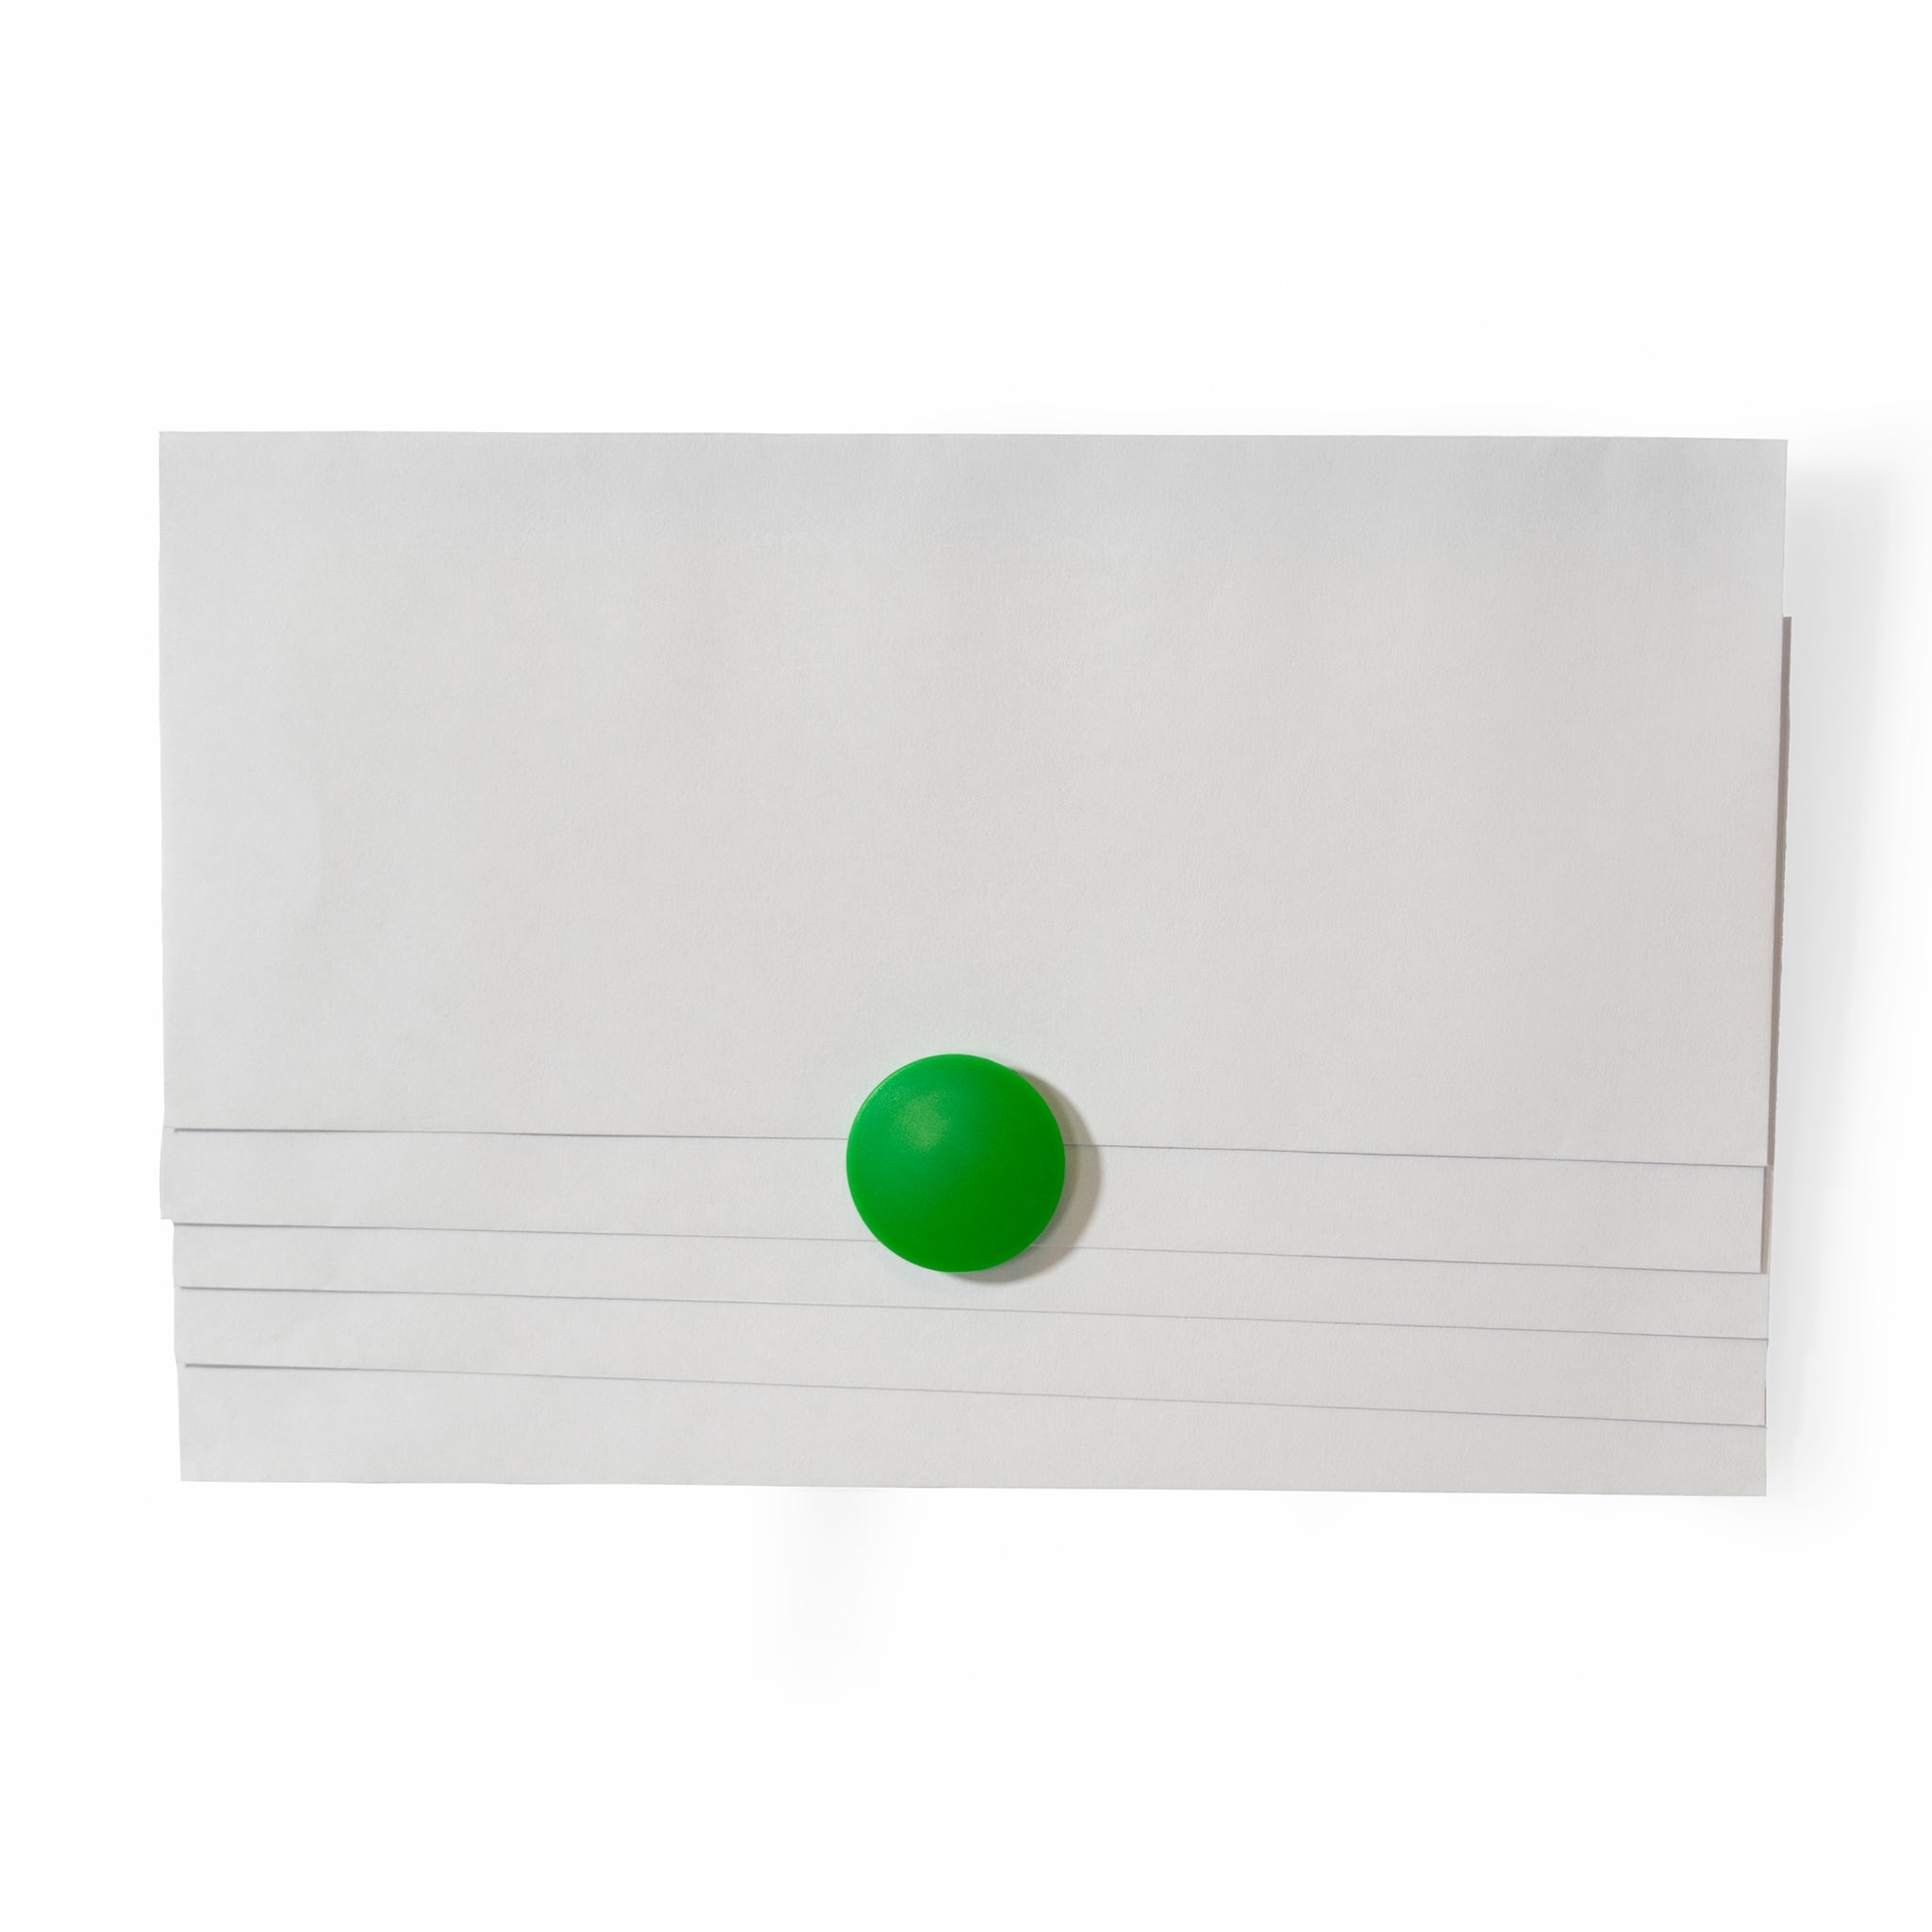 WHITEBOARD MAGNETS BUTTONS - Premier Audio Visual